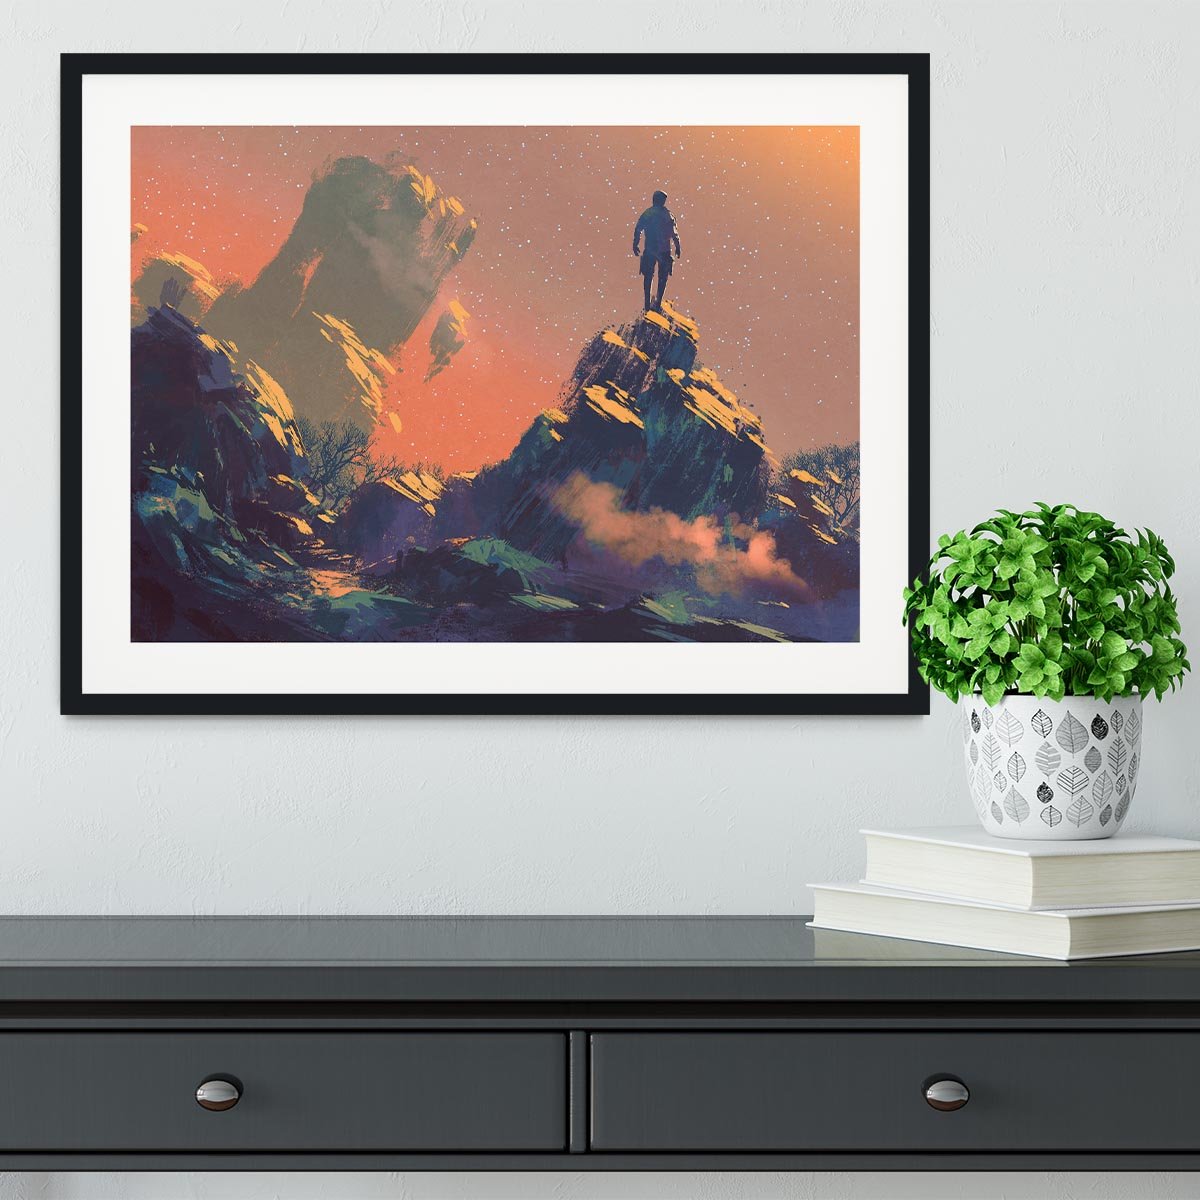 Top of the hill watching the stars Framed Print - Canvas Art Rocks - 1